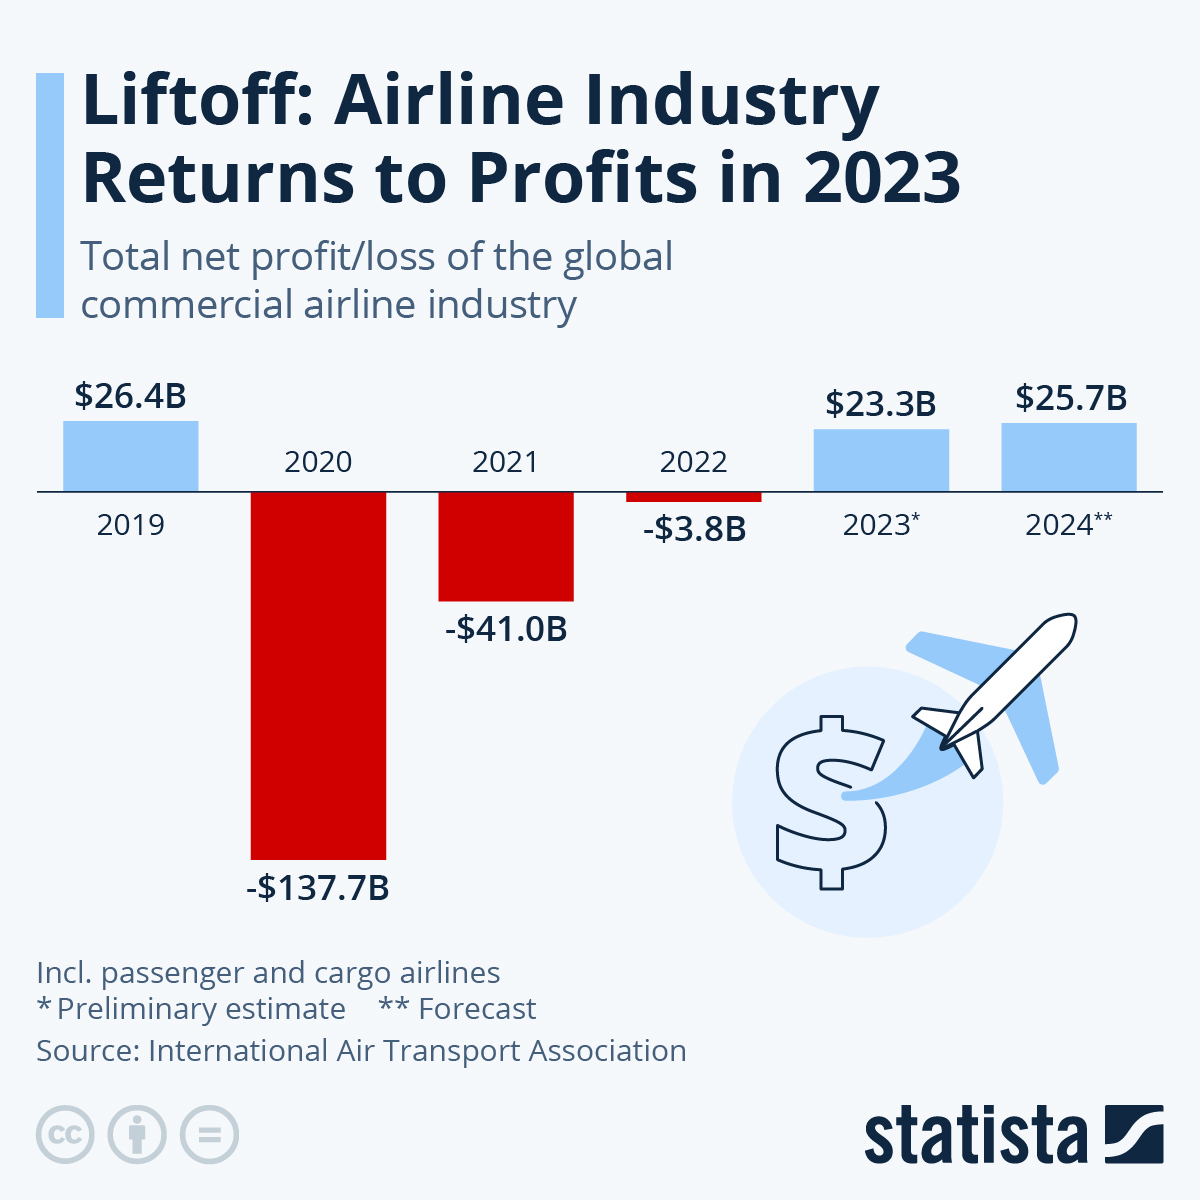 Liftoff: Airline Industry Returns to Profits in 2023